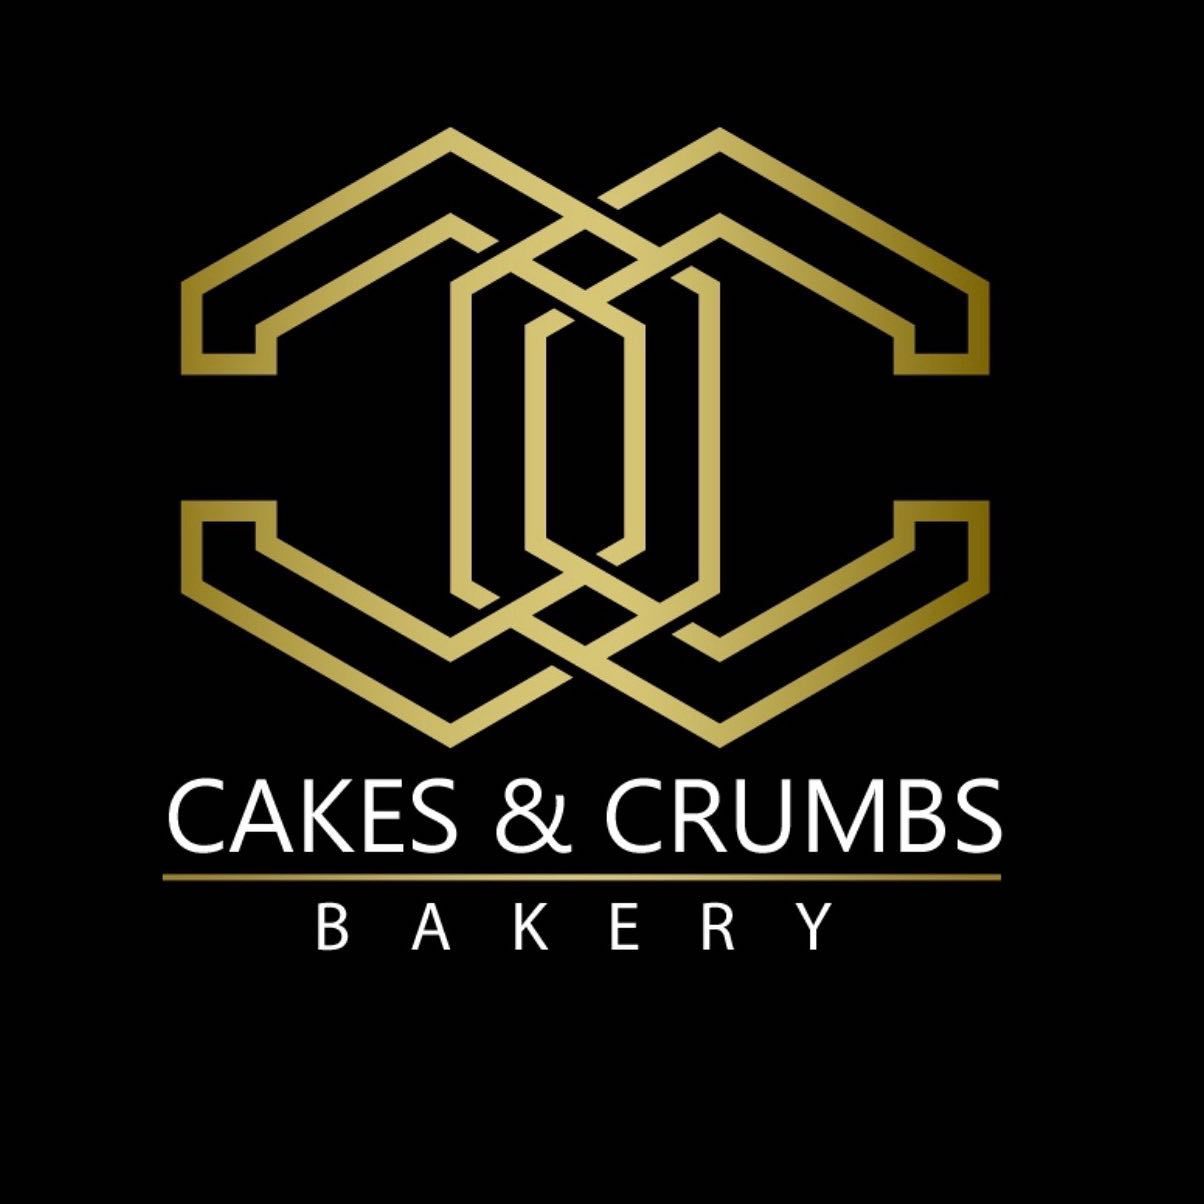 New Bakery Now Open In 5 Towns!